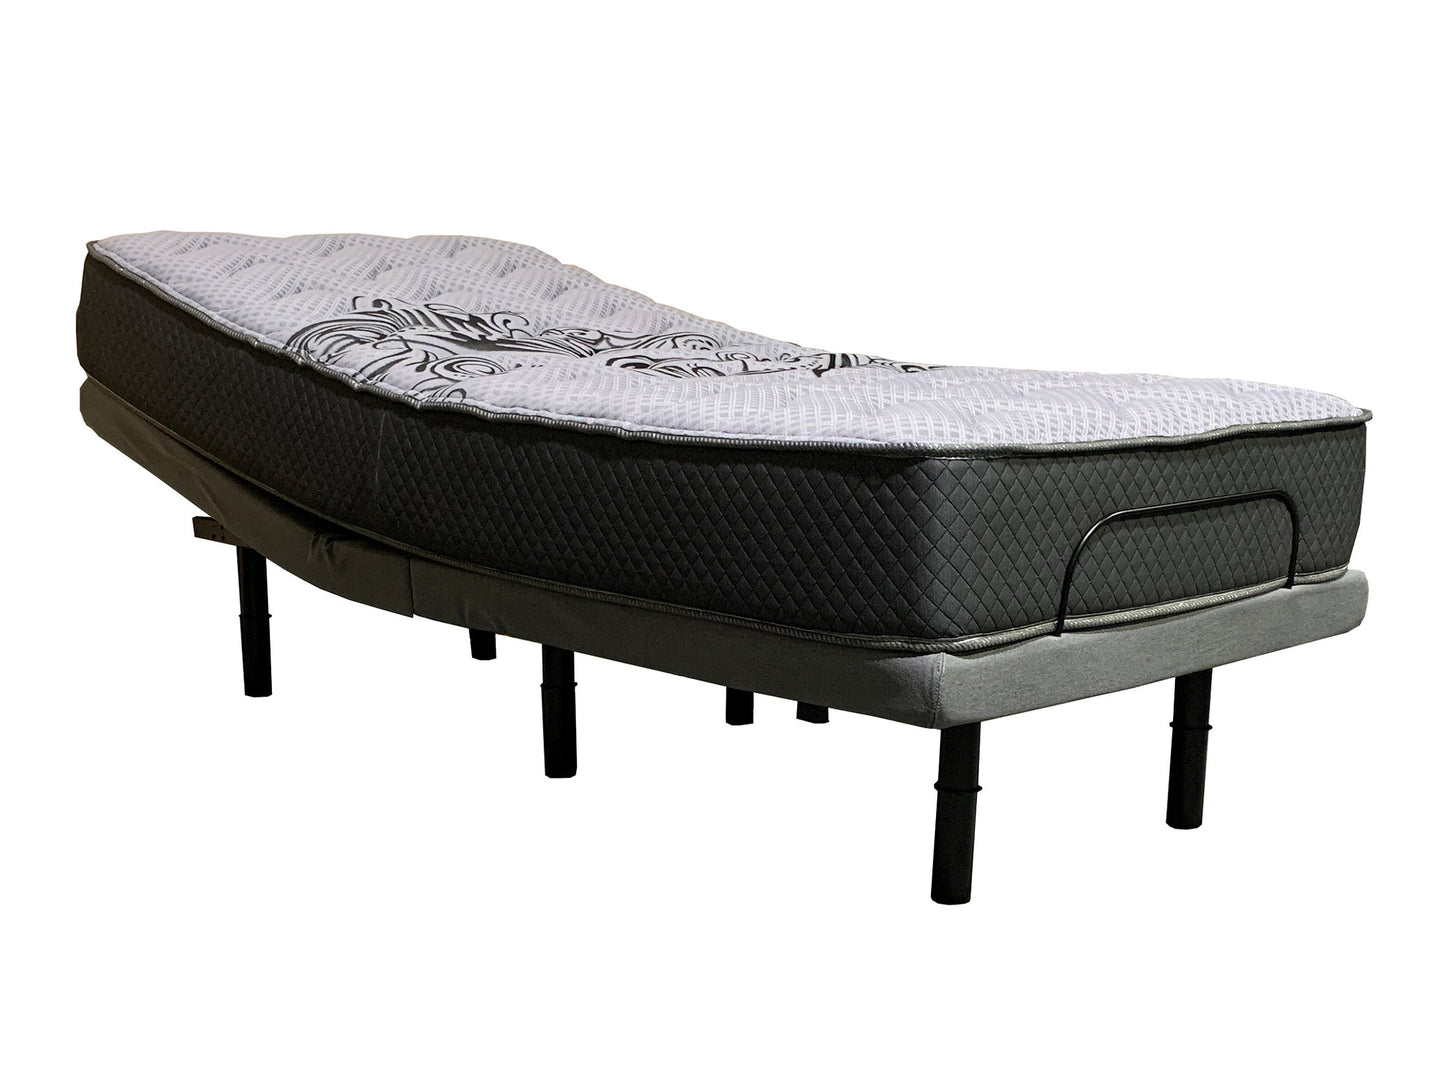 Deluxe Model Adjustable Electric Bed